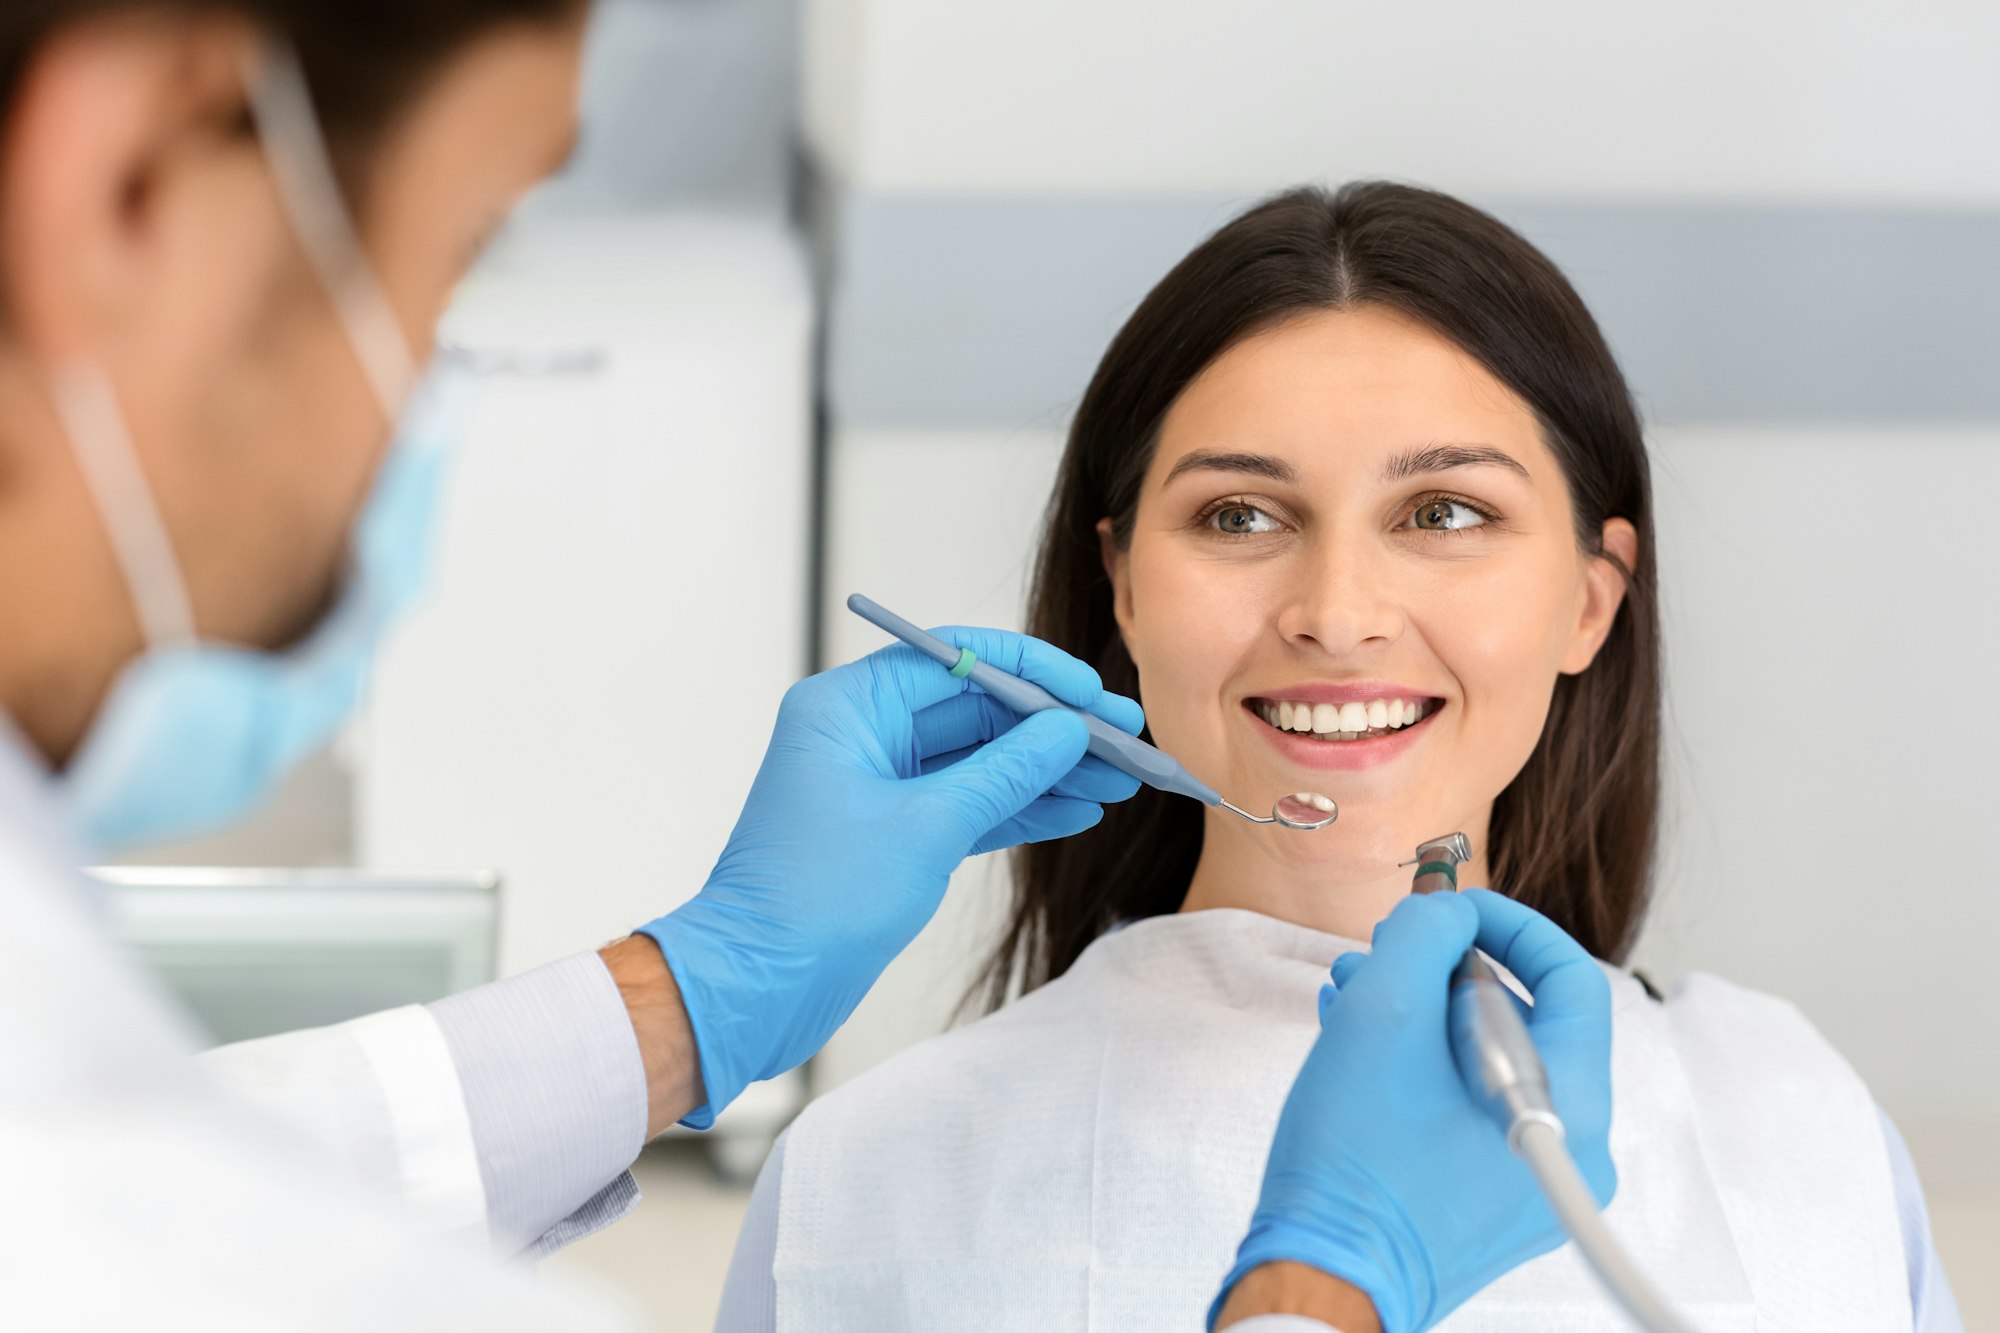 Woman smiling during a dental visit, illustrating the positive experience of Guided Tissue Regeneration at Schlueter Periodontics.